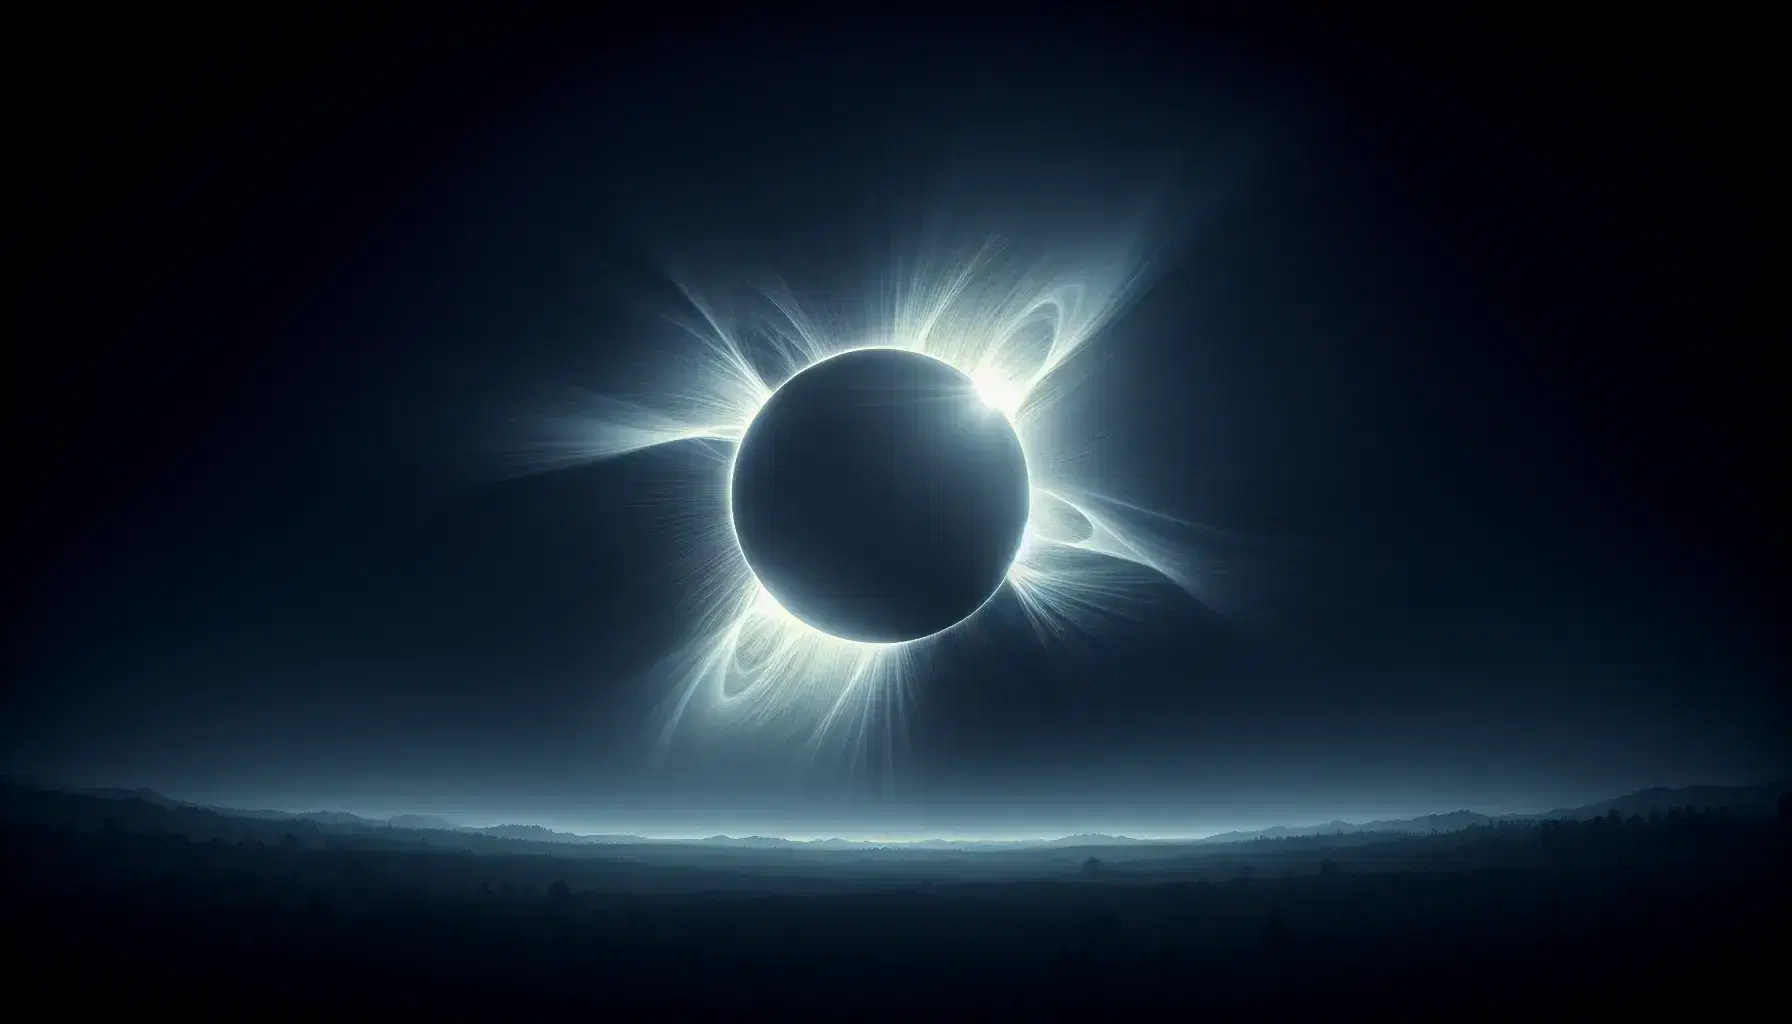 Total solar eclipse with visible solar corona and sky gradient from dark to light blue, silhouette of trees in the foreground.